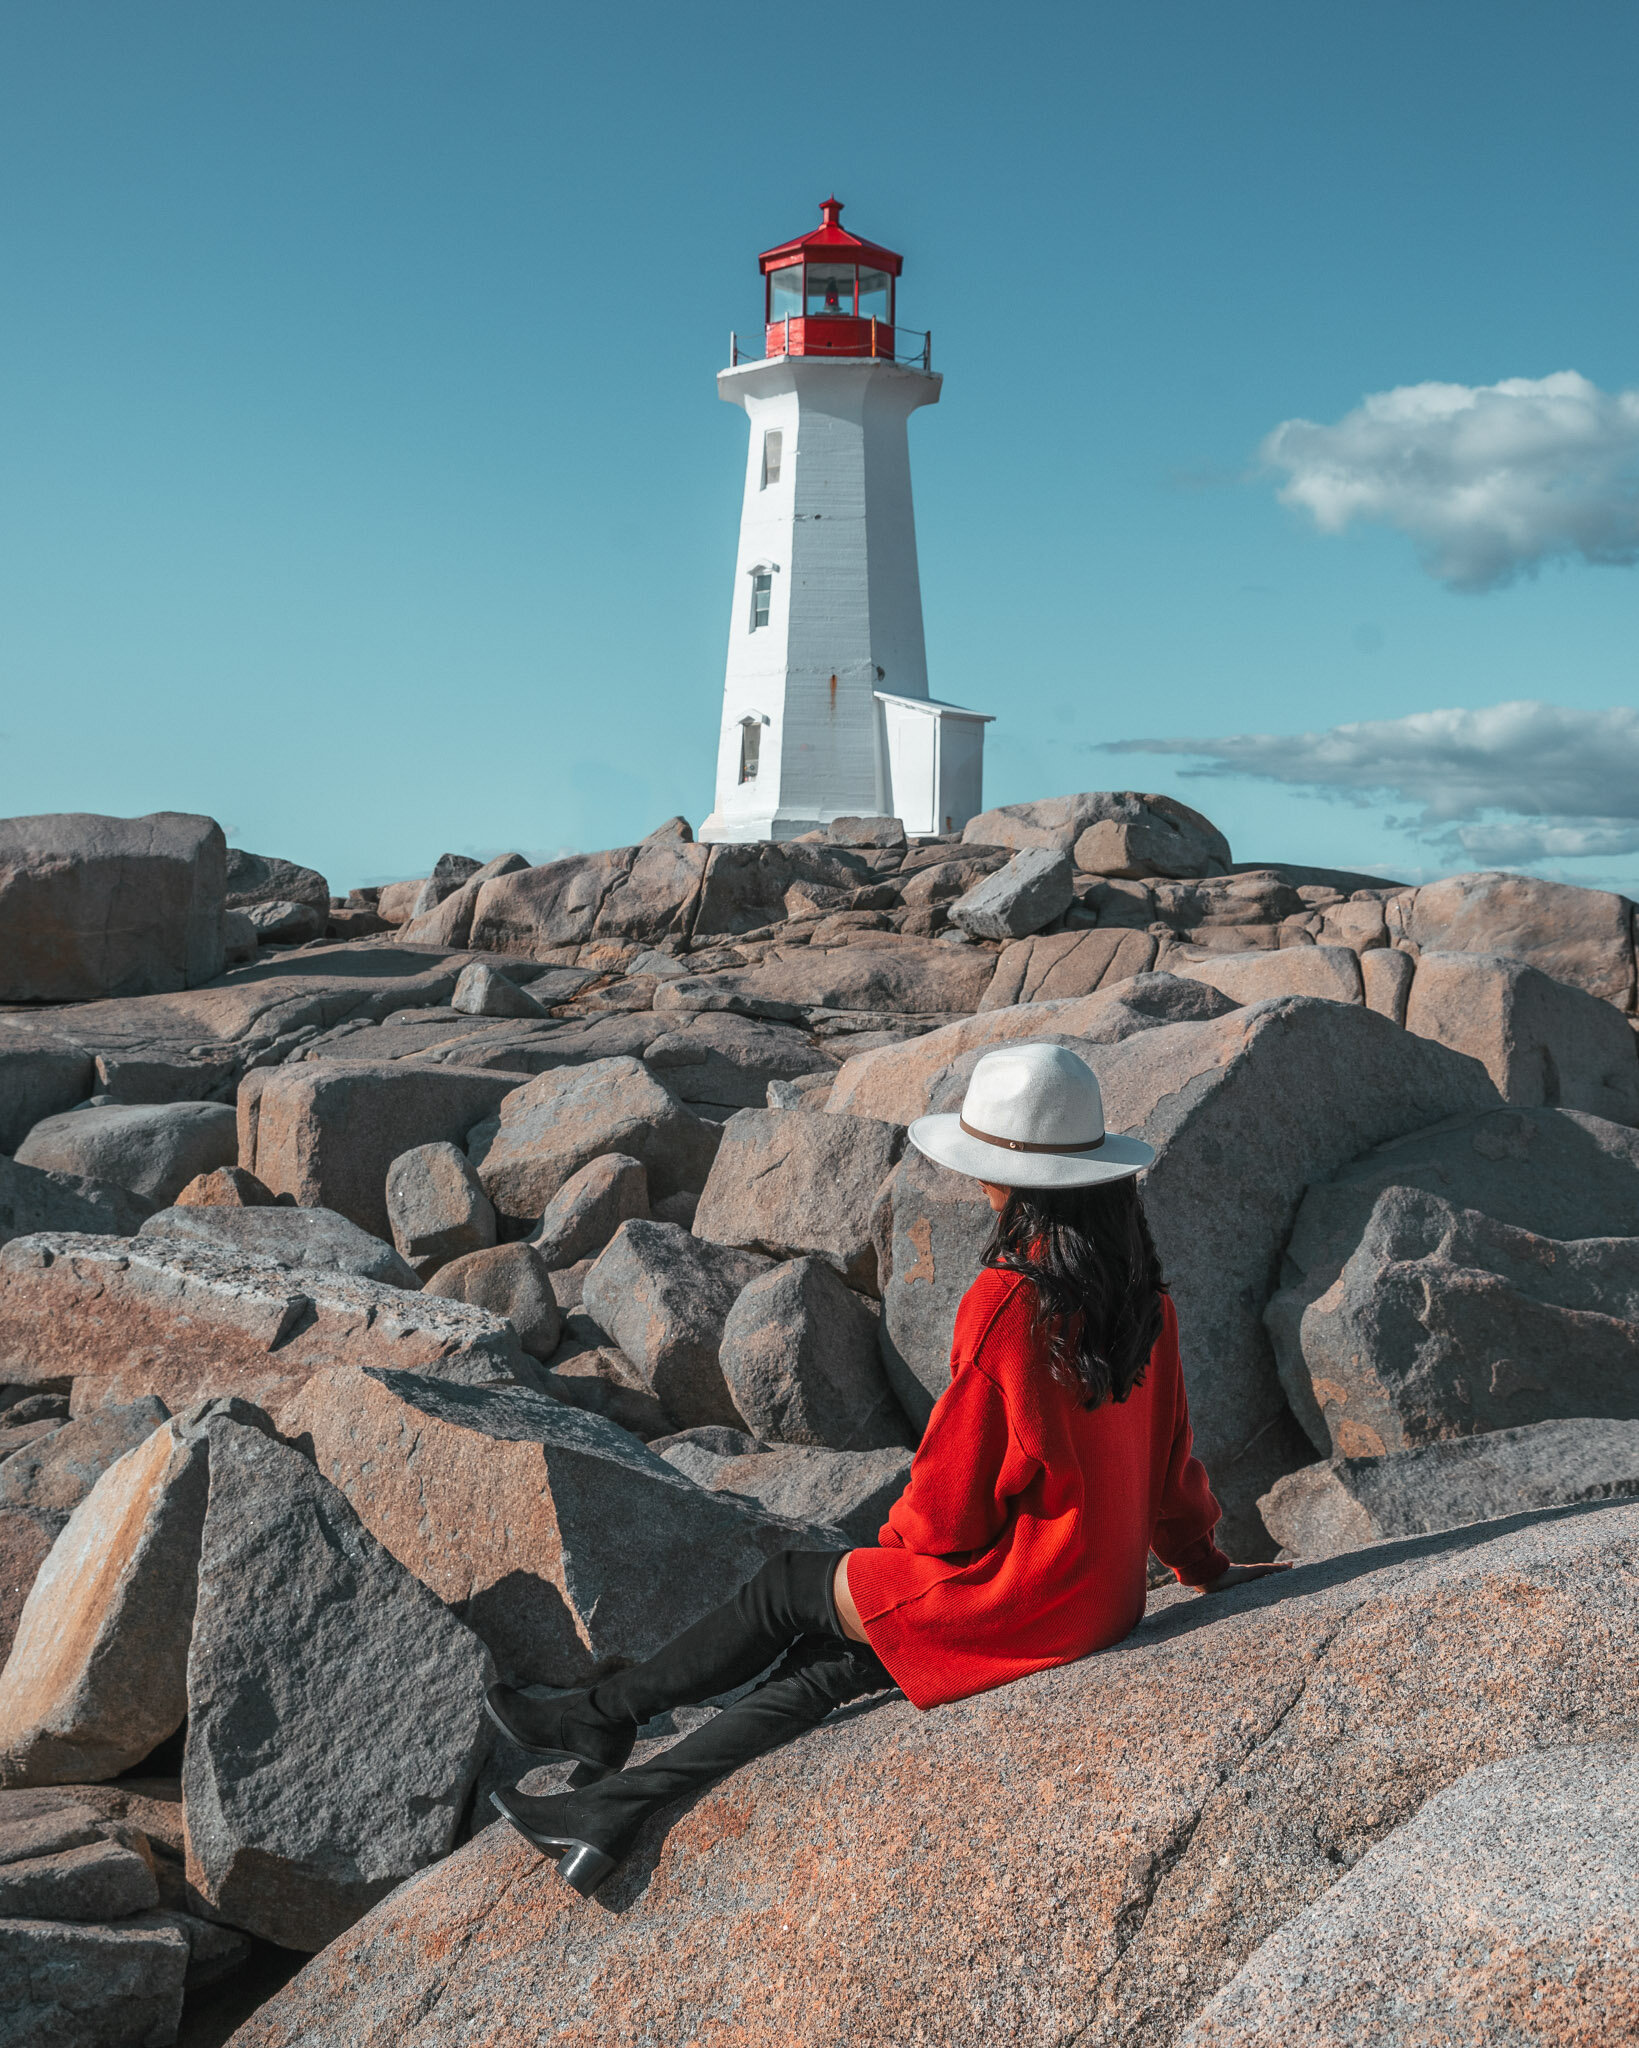 Peggy's Cove Lighthouse in Nova Scotia // Cruise Review: 11-Day New England & Canada on the Seabourn Quest // #readysetjetset #cruise #luxury #travel #cruising #canada #halifax